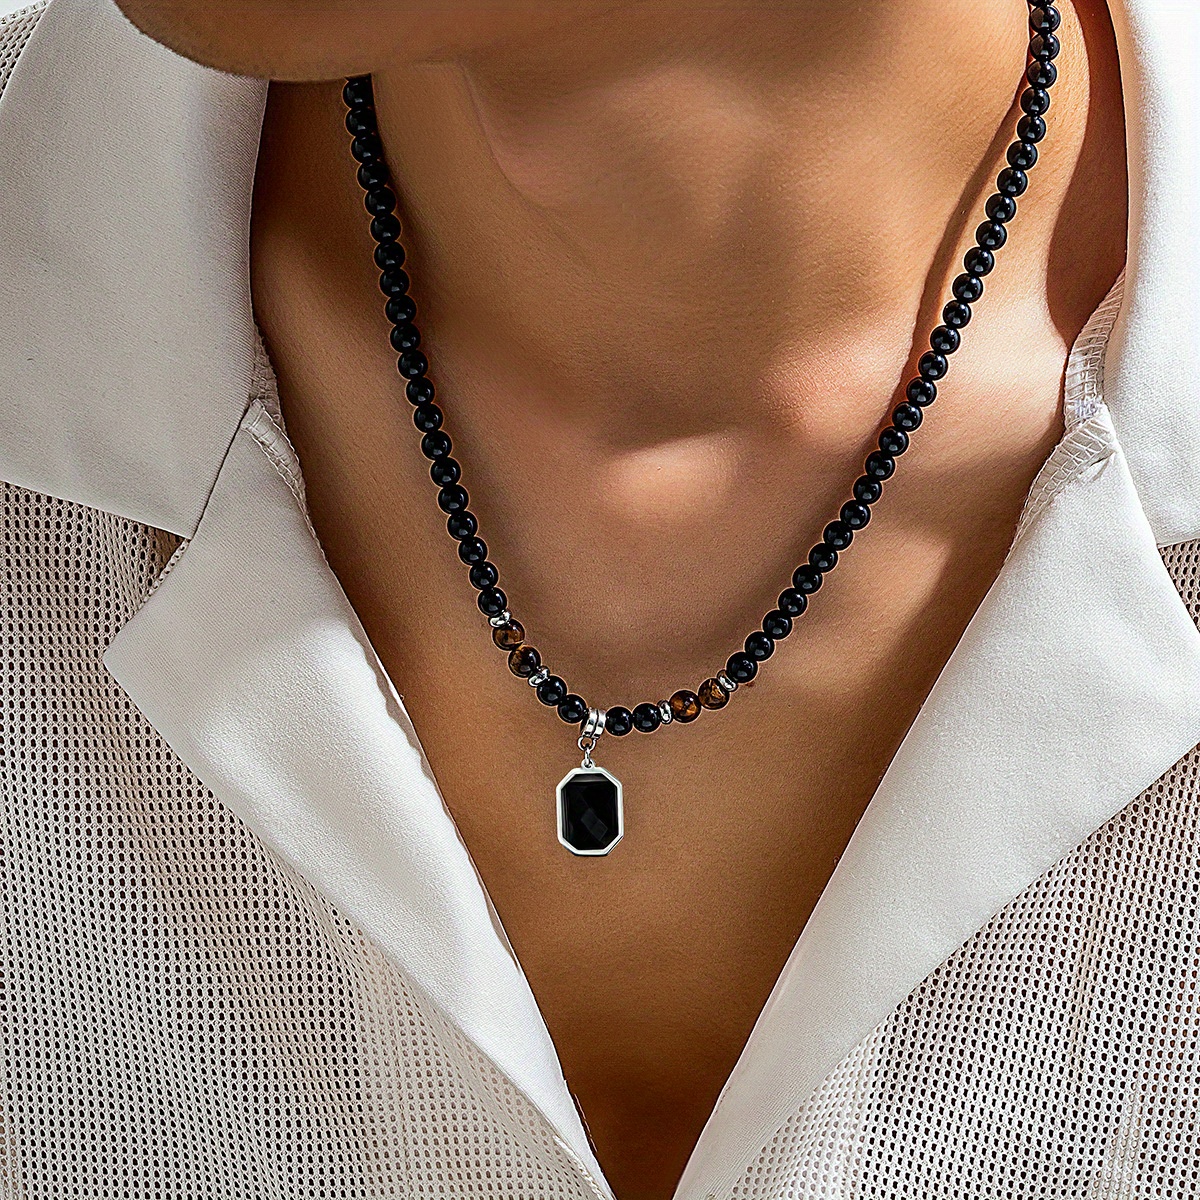 

1pc Hip Hop Stainless Steel Geometric Pendant Necklace, Black Acrylic Stone Beads Choker Jewelry For Men